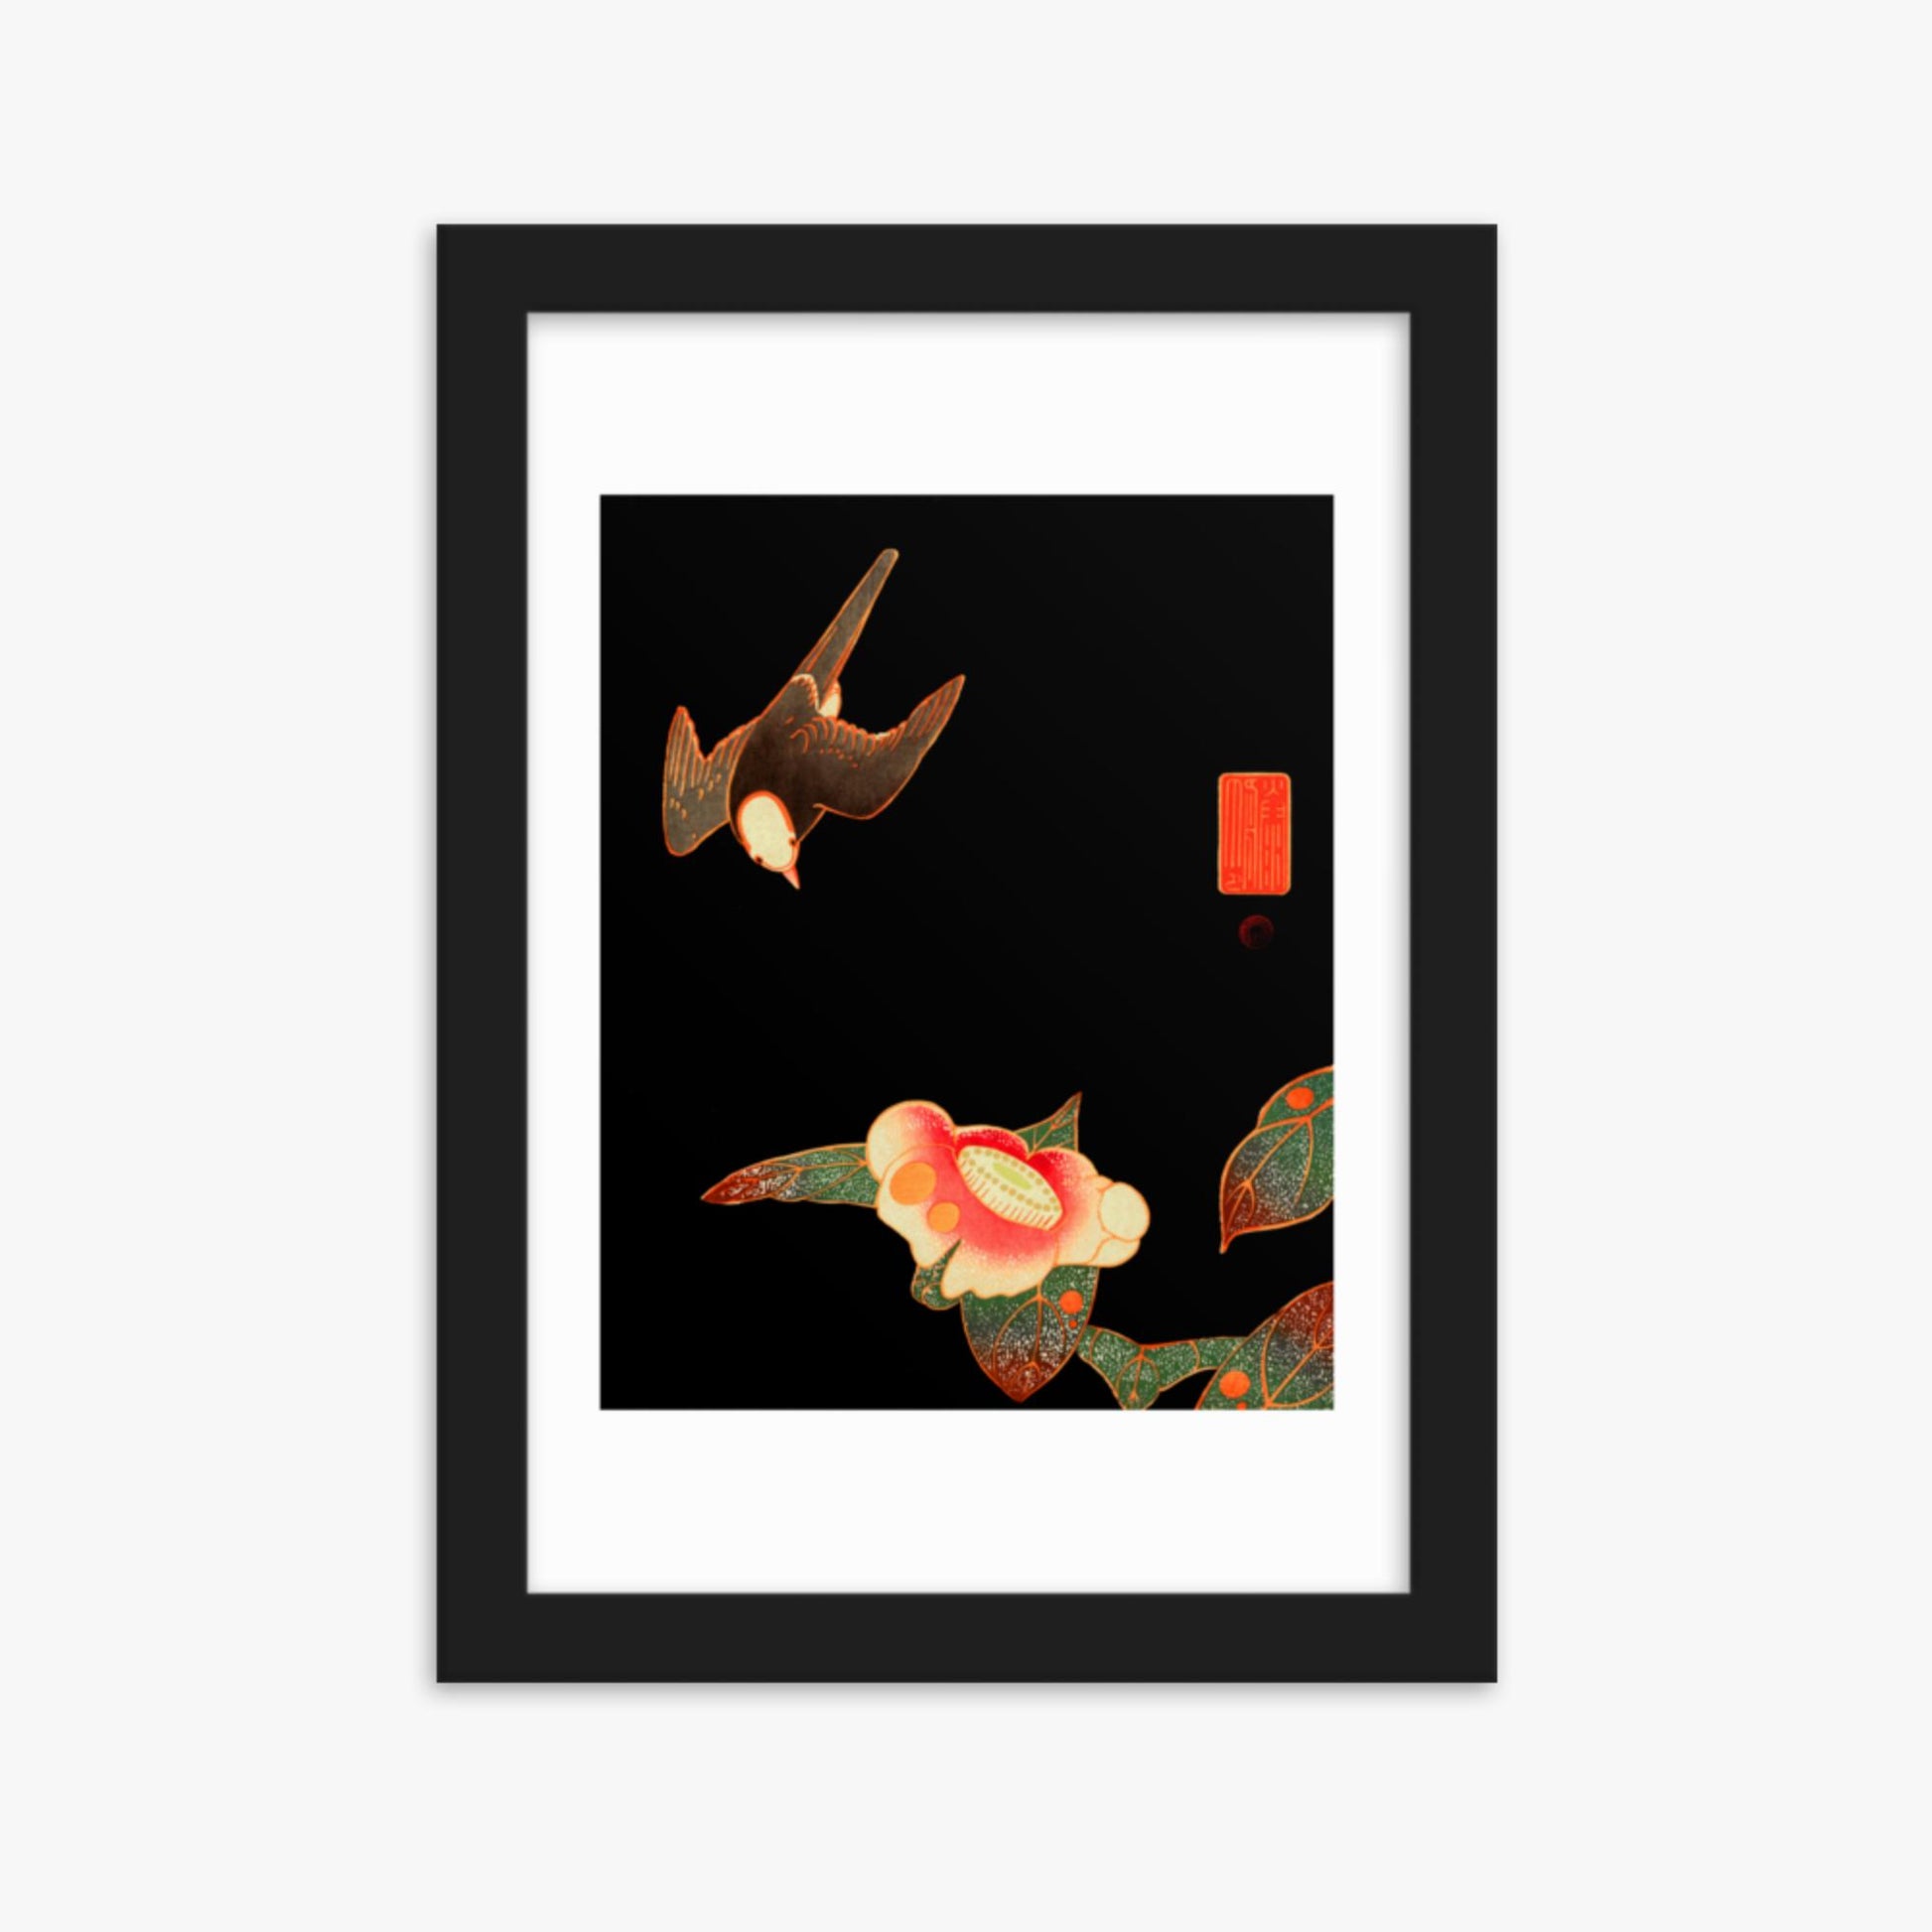 Ito Jakuchu - Swallow and Camellia 21x30 cm Poster With Black Frame